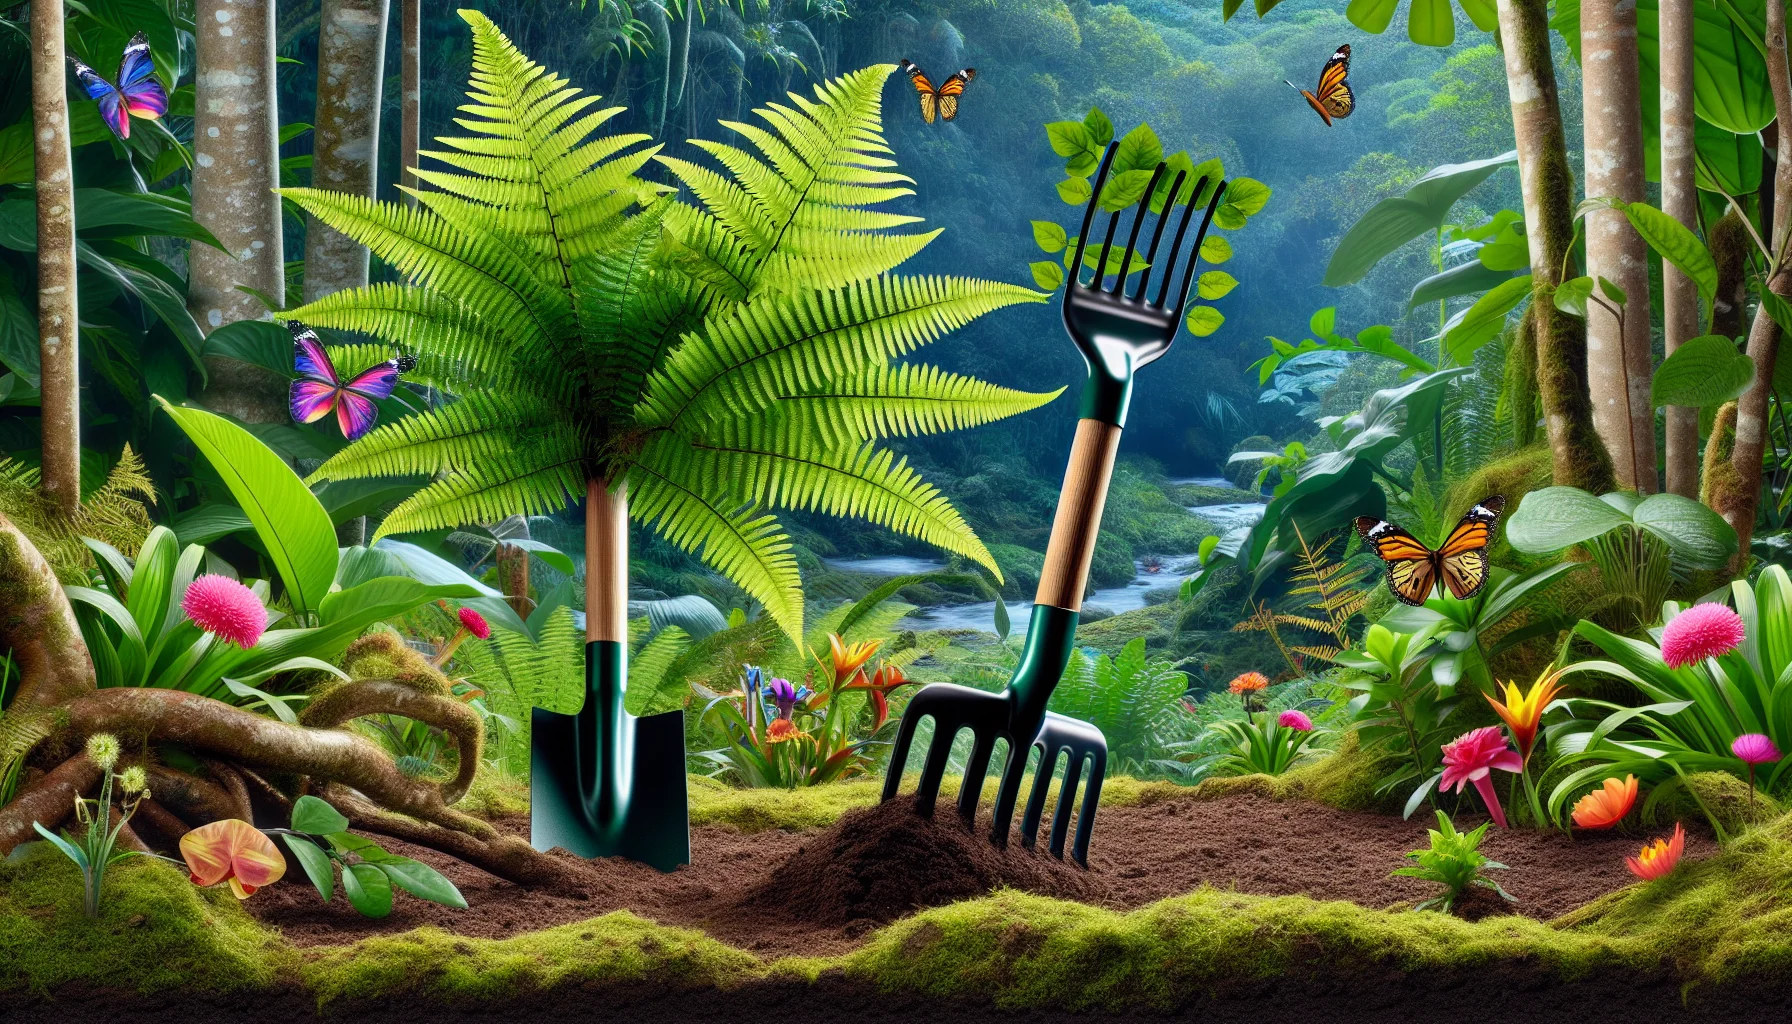 Create an amusing yet convincing image featuring garden tools from the Amazon rainforest area. Picture a fern-yielding shovel and a leaf-like rake having a fun time in a tropical garden. The tools seem to sprout from the ground as if they're plants themselves, blending naturally with their lush surroundings. The backdrop is a vibrant Amazon rainforest, bursting with diverse flora and a sprinkling of colourful butterflies. The image radiates a sense of fun and adventure associated with gardening, making it look not only like a necessary chore but also an enjoyable hobby.